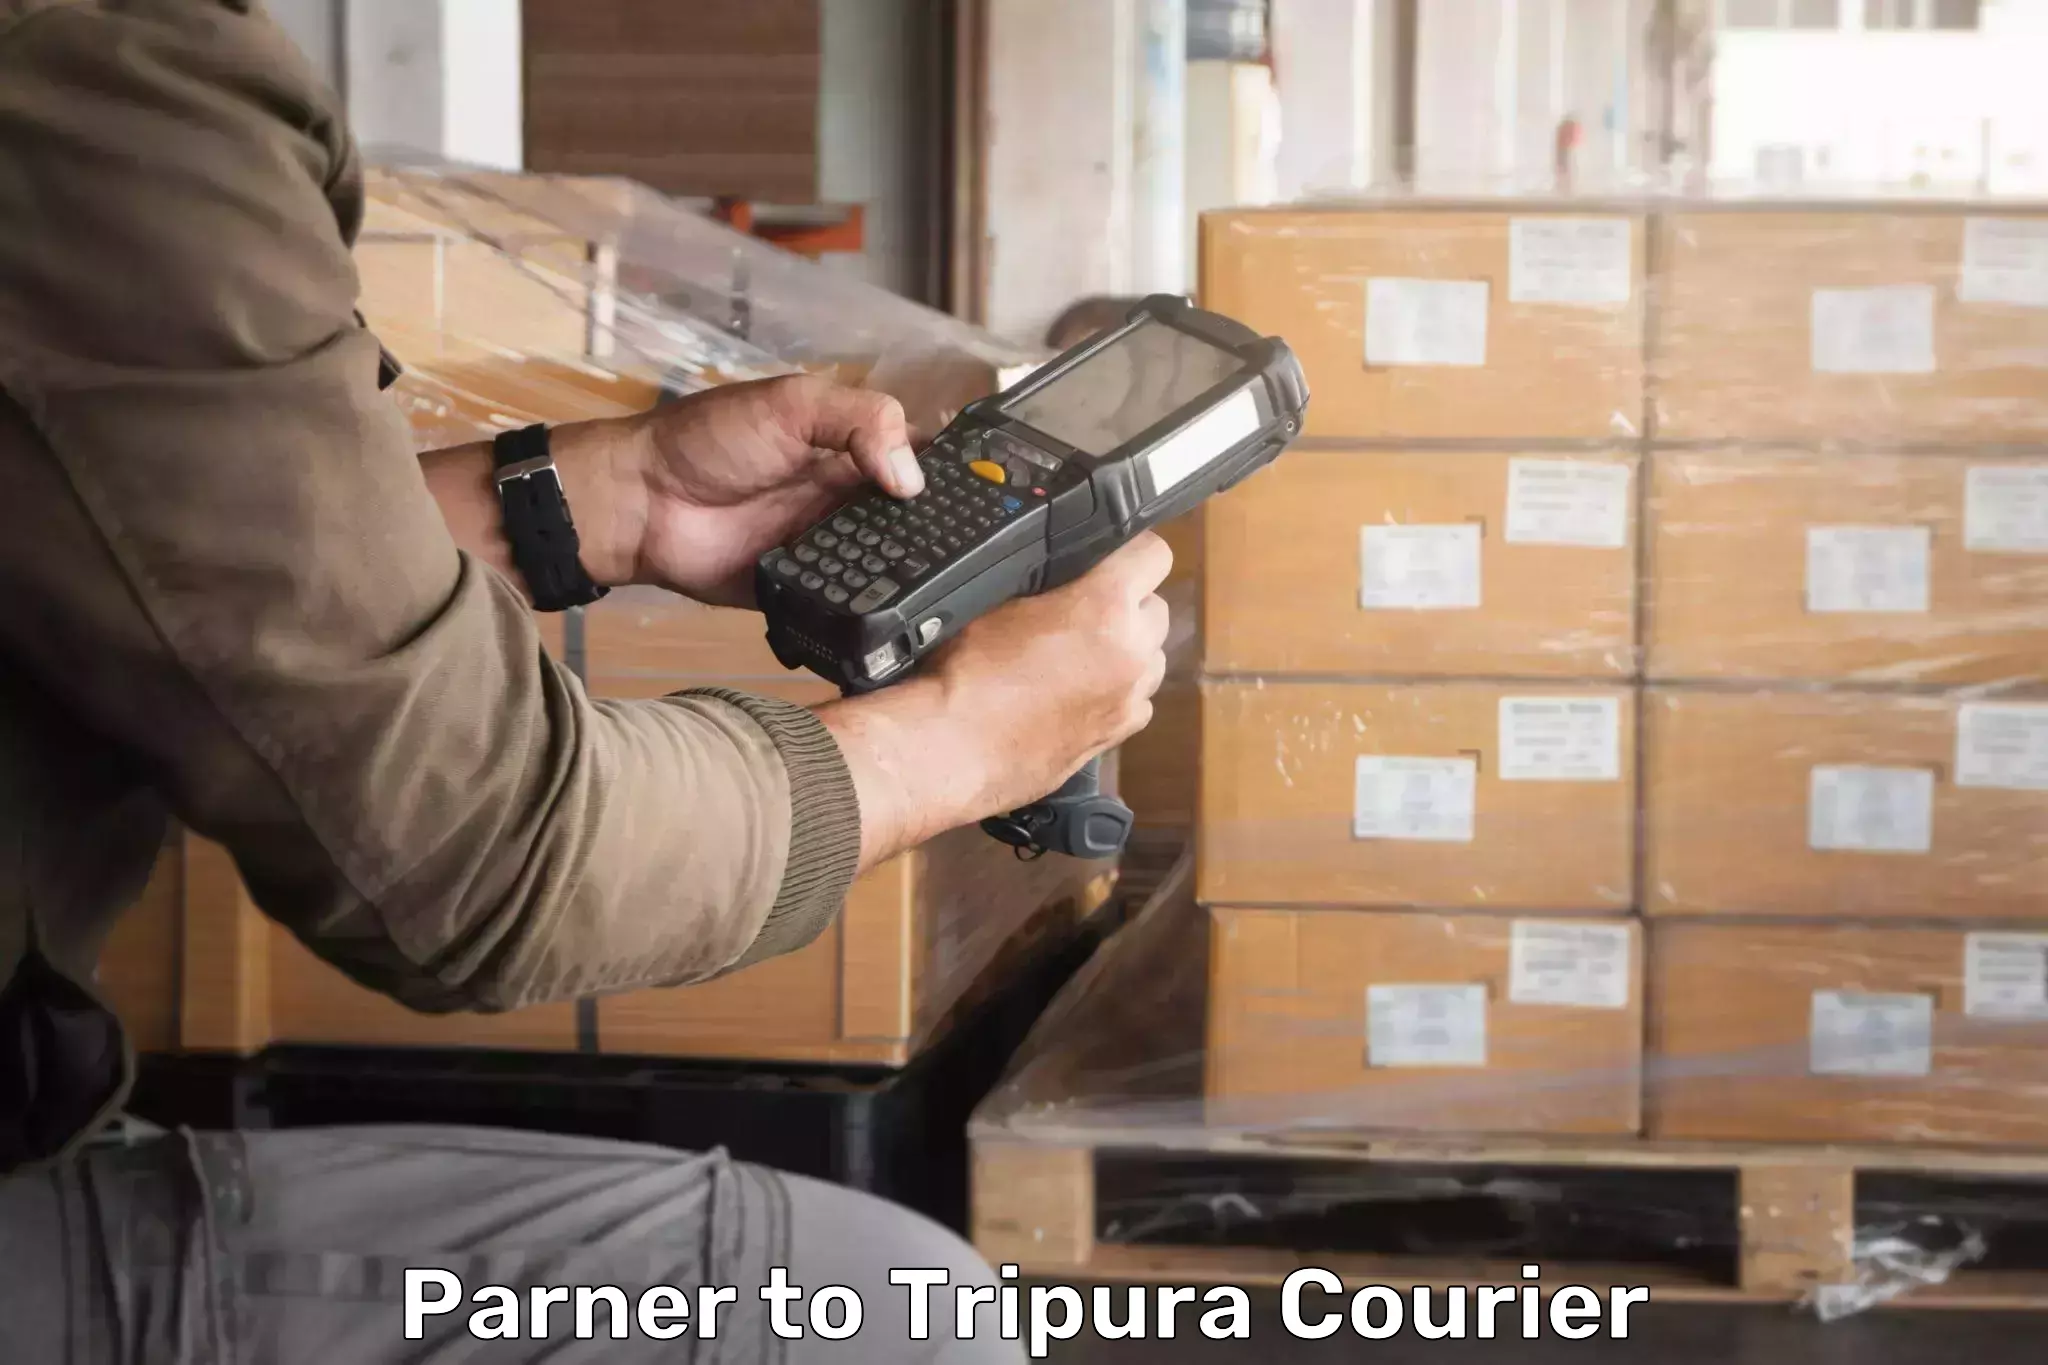 Advanced package delivery Parner to Tripura